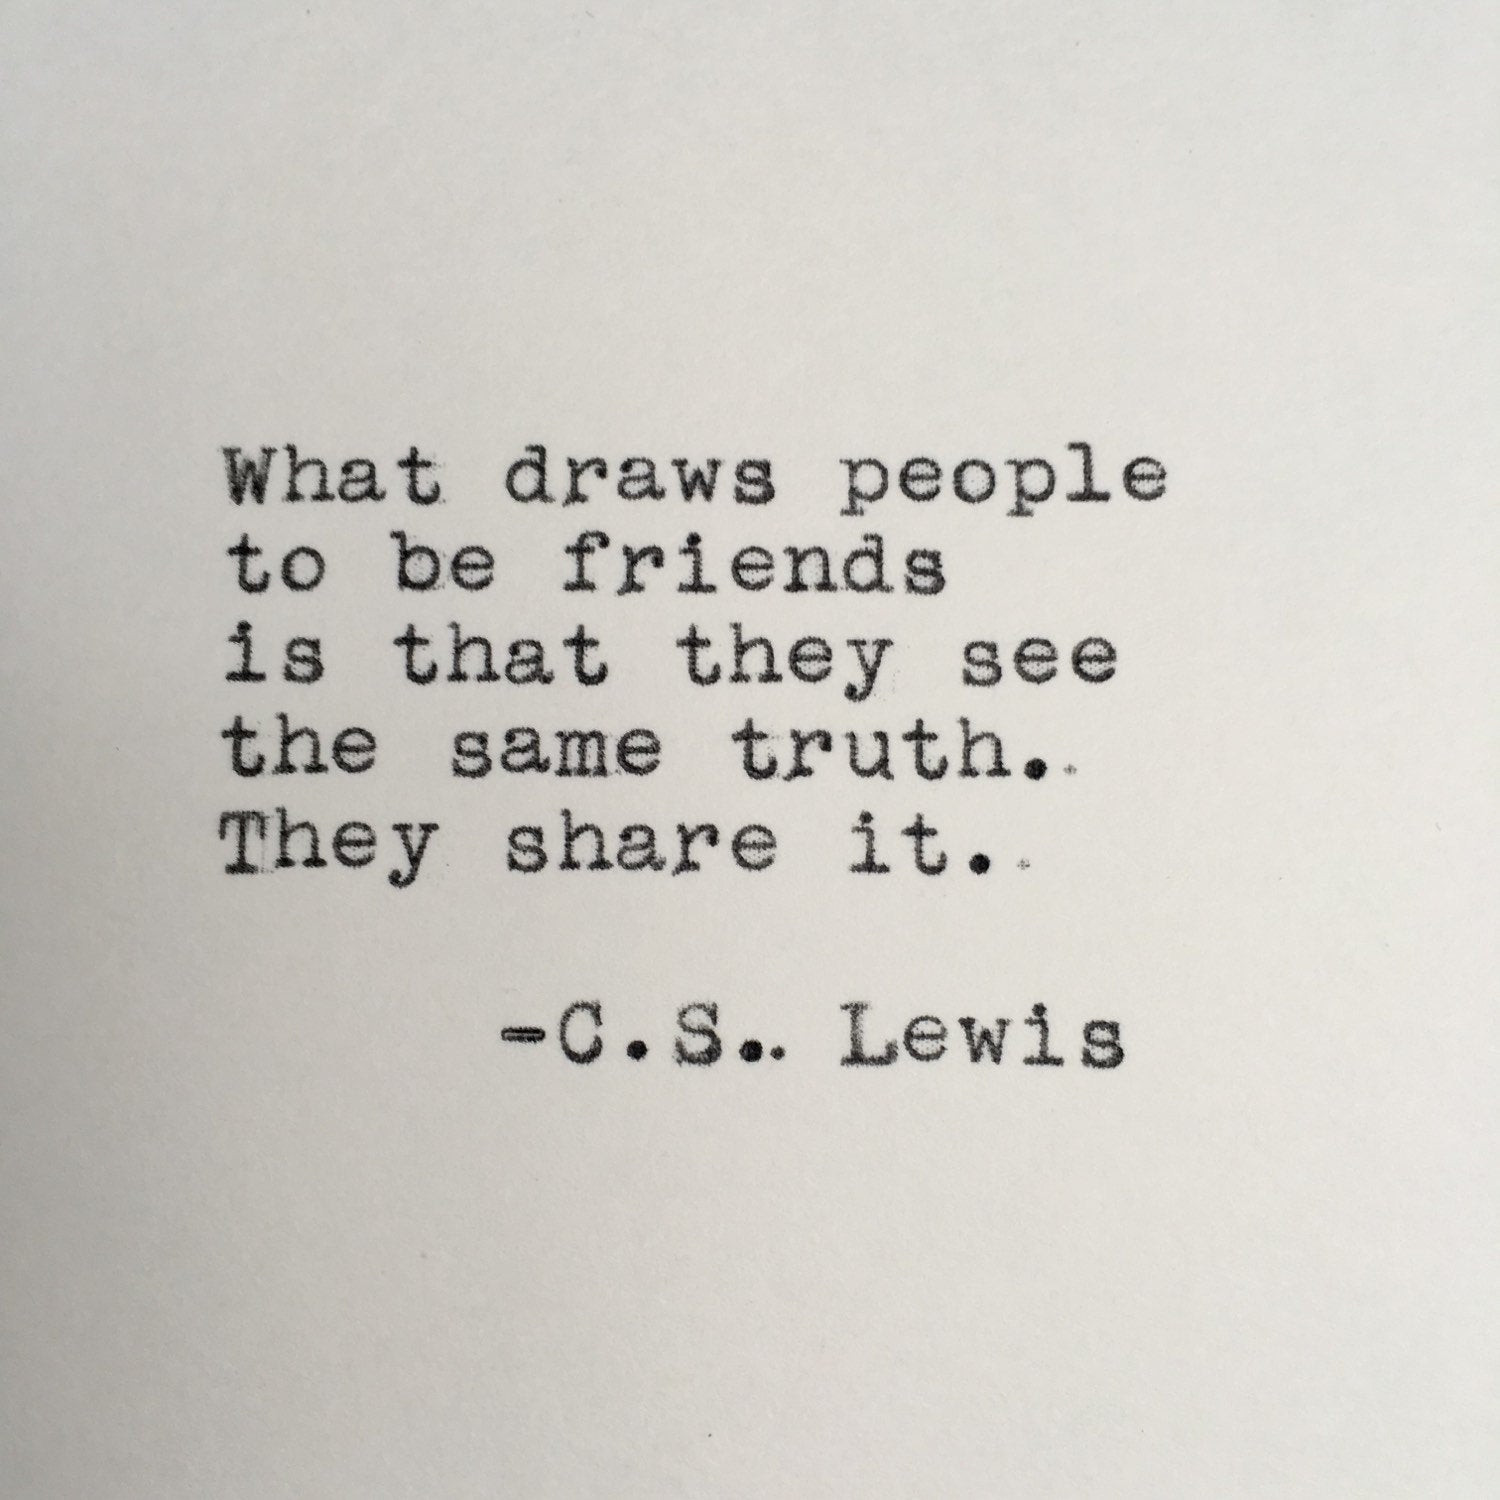 C.S.Lewis Quotes On Friendship
 C S Lewis Friendship Quote Typed on Typewriter 4x6 White